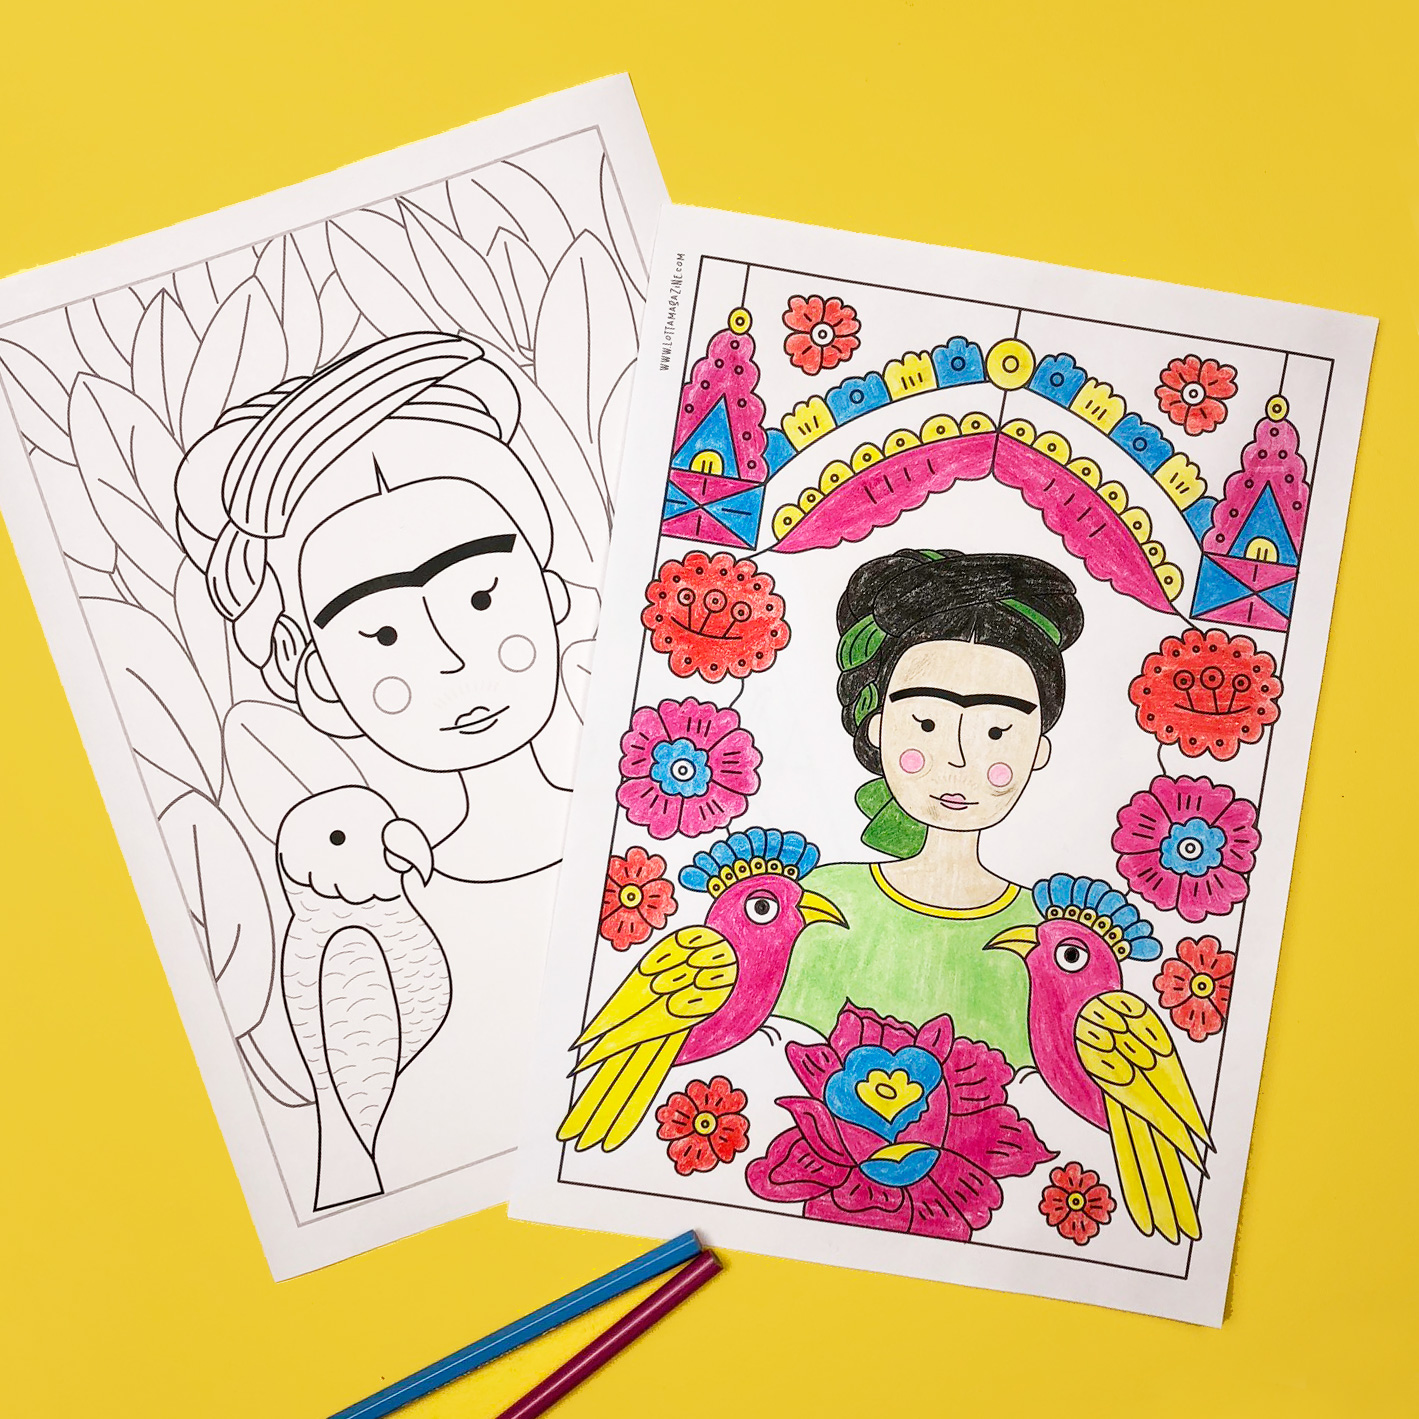 Frida kahlo colouring pages